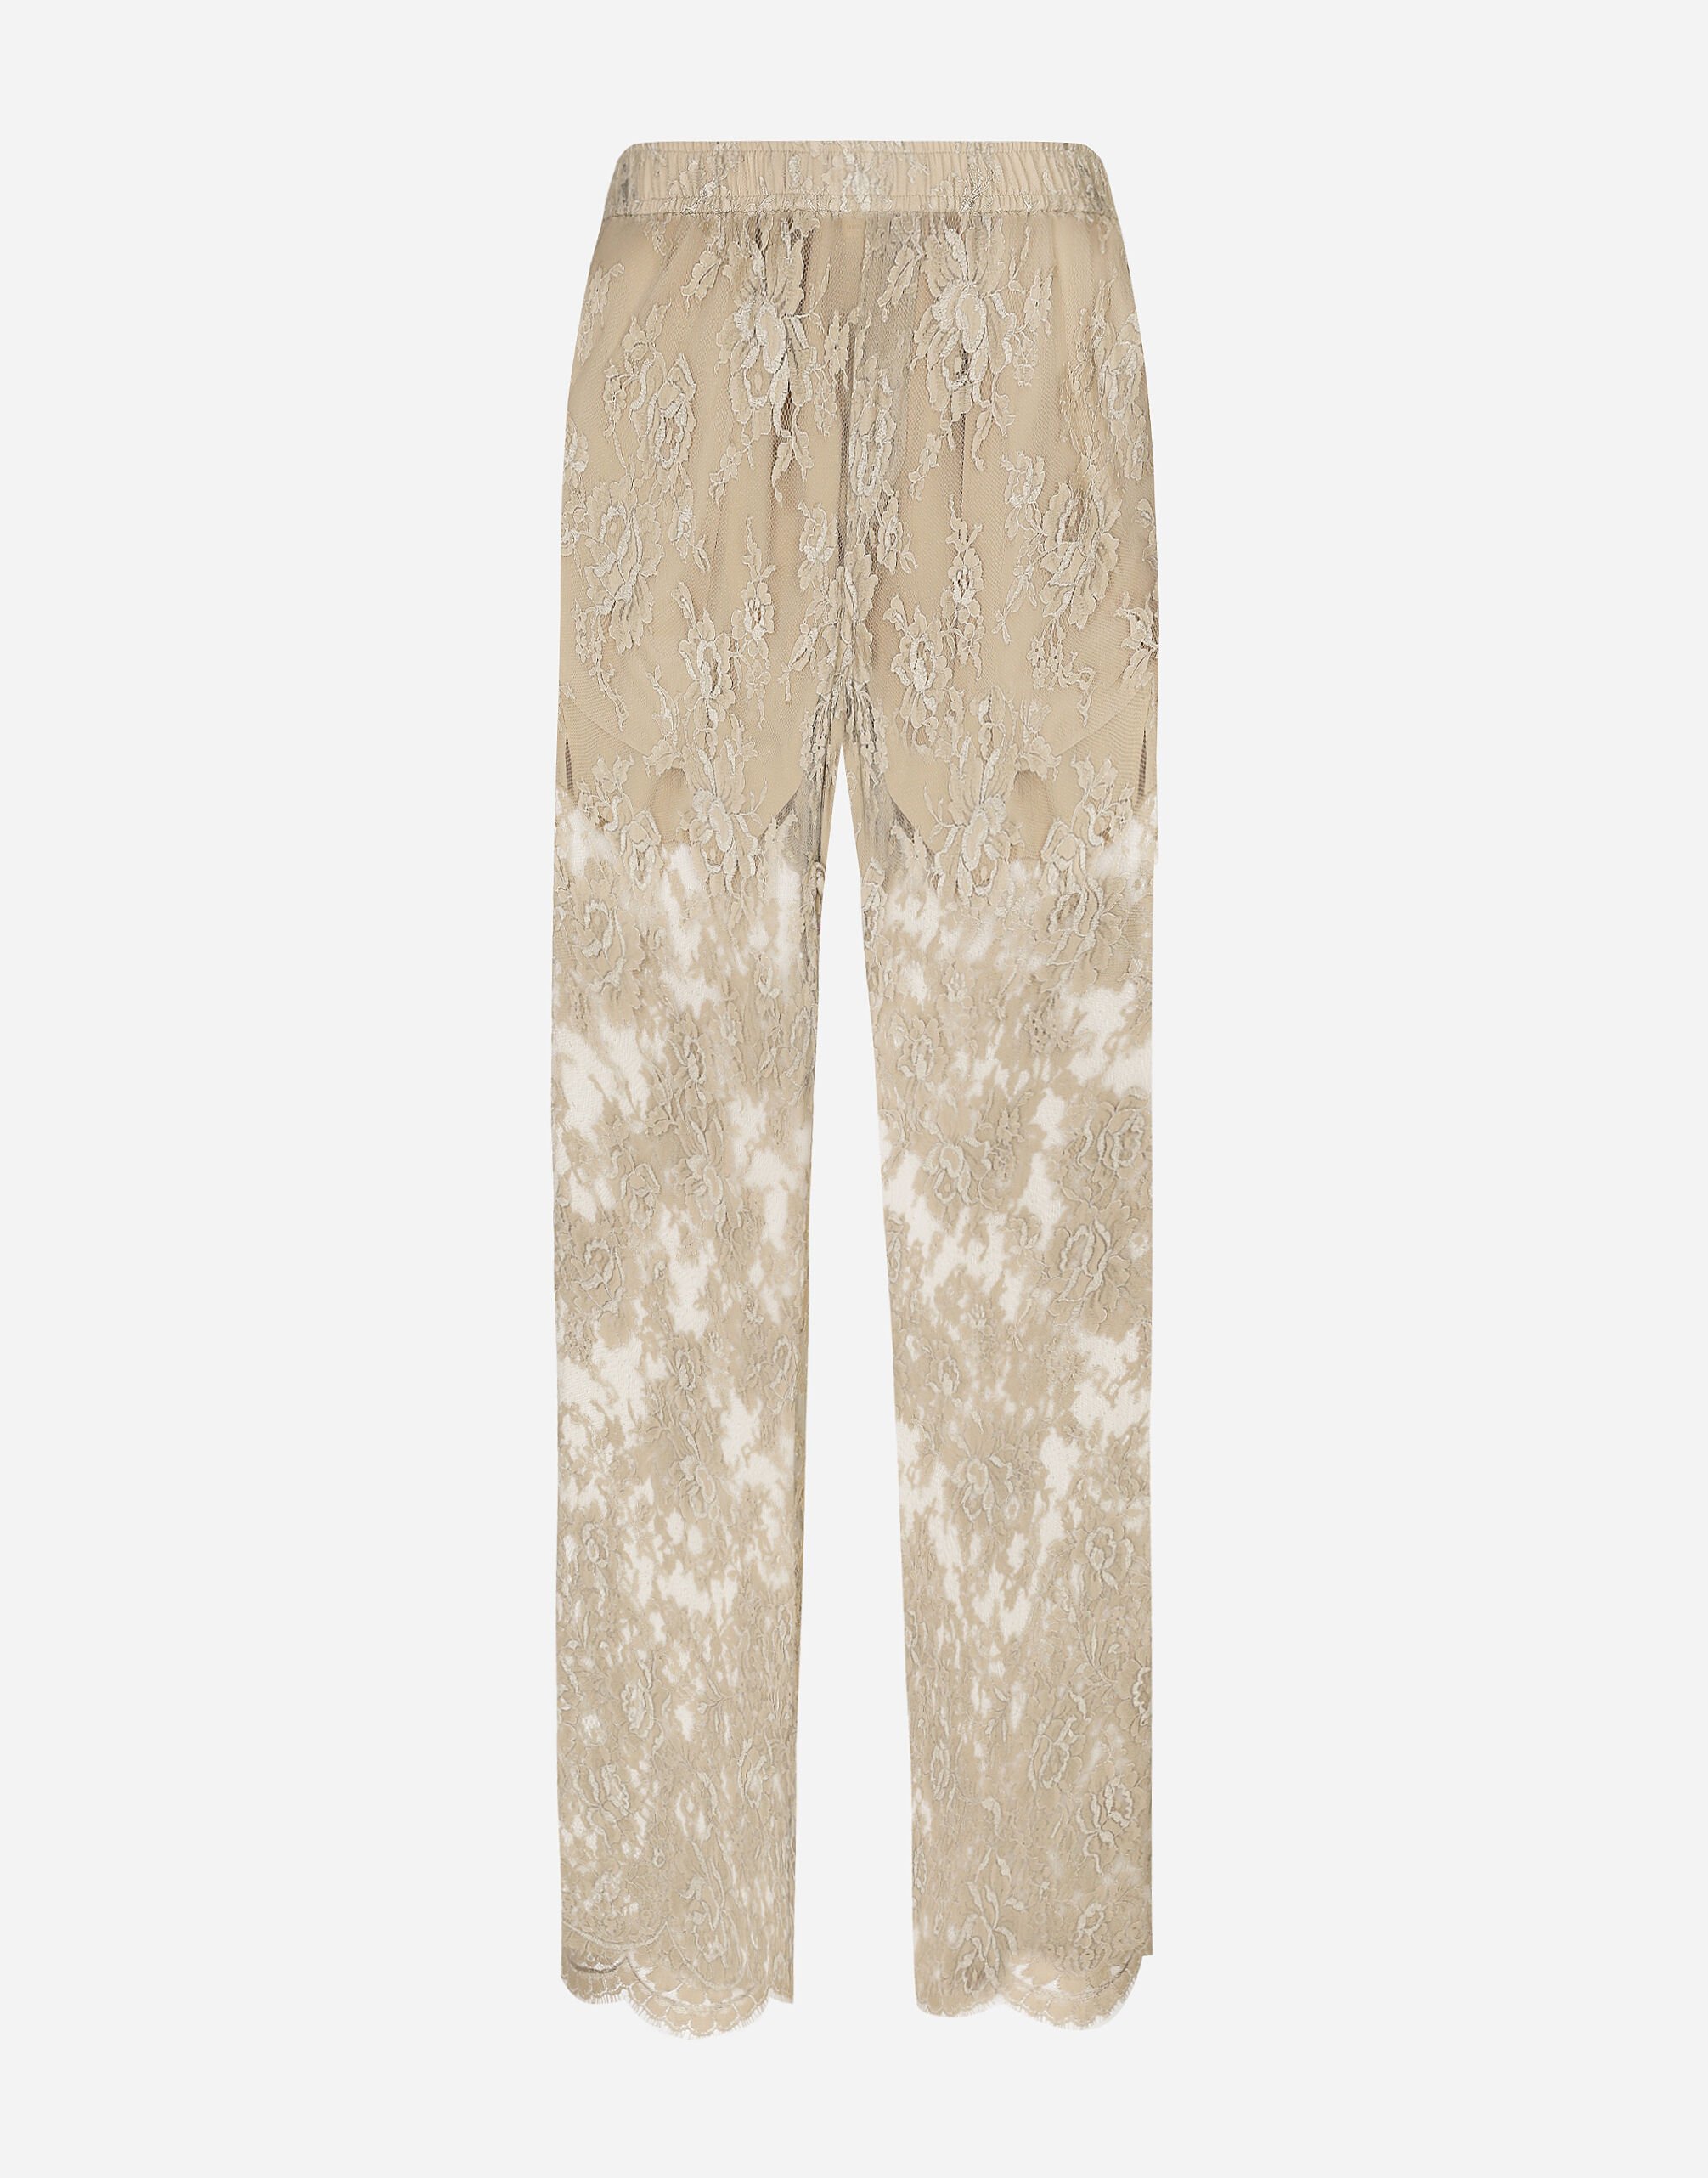 Dolce & Gabbana Tailored Galloon lace pants Beige GY6GMTGH145